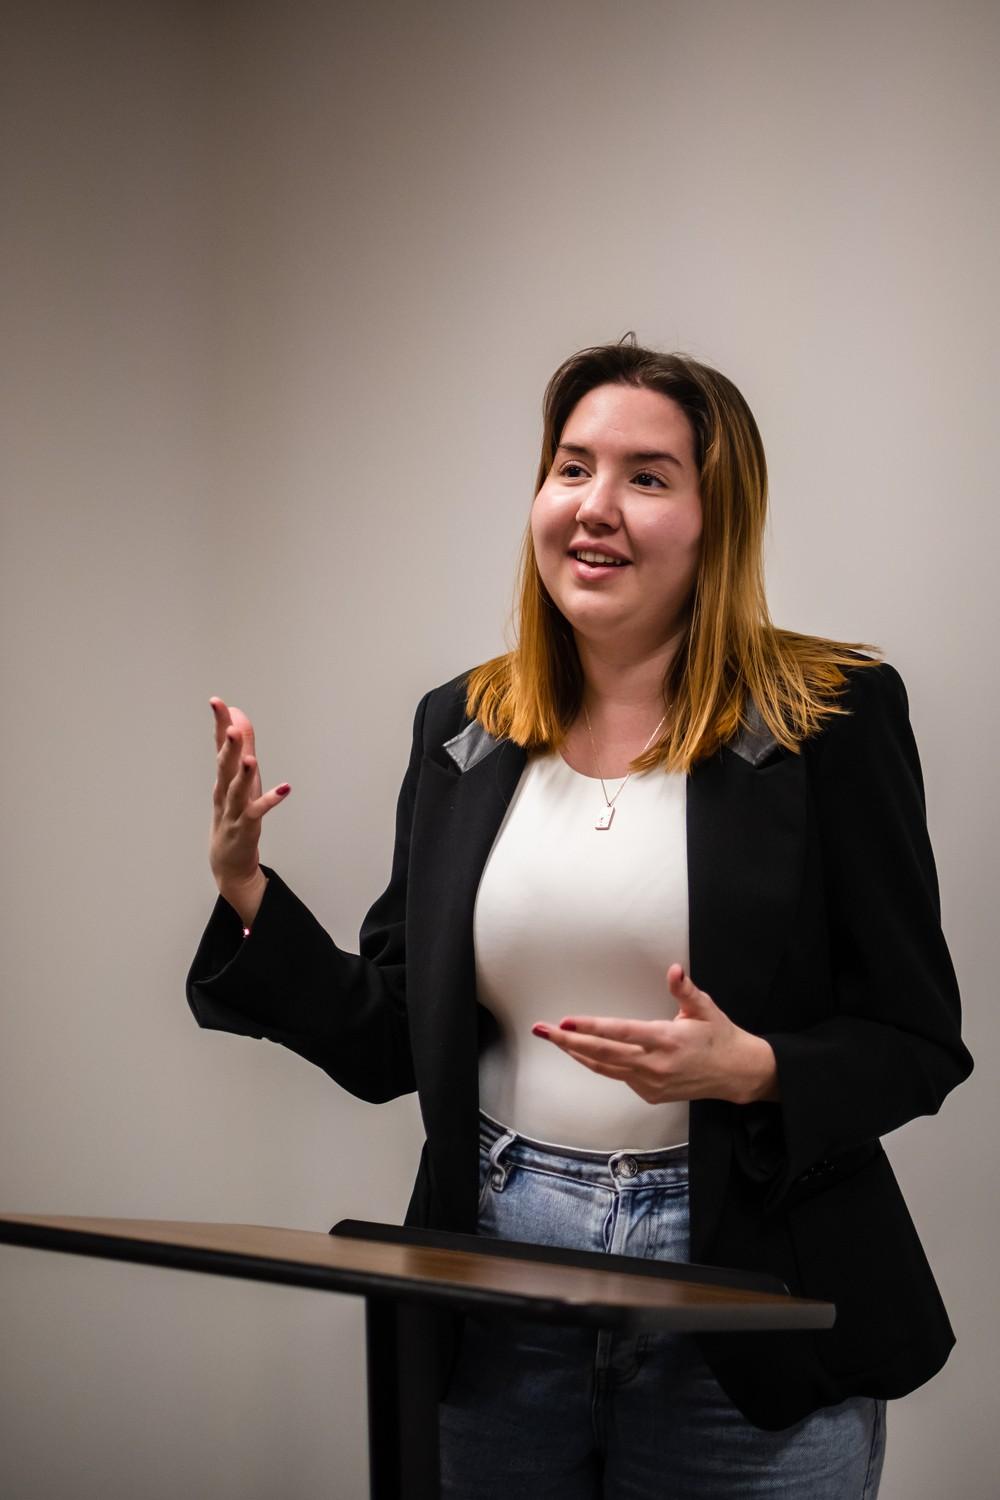 Leyla Pisirici poses behind a podium while re-enacting her debate skills in January. Pisirici was a finalist in the country her first year on the team and has now debated for three years. Photo by Lucian Himes